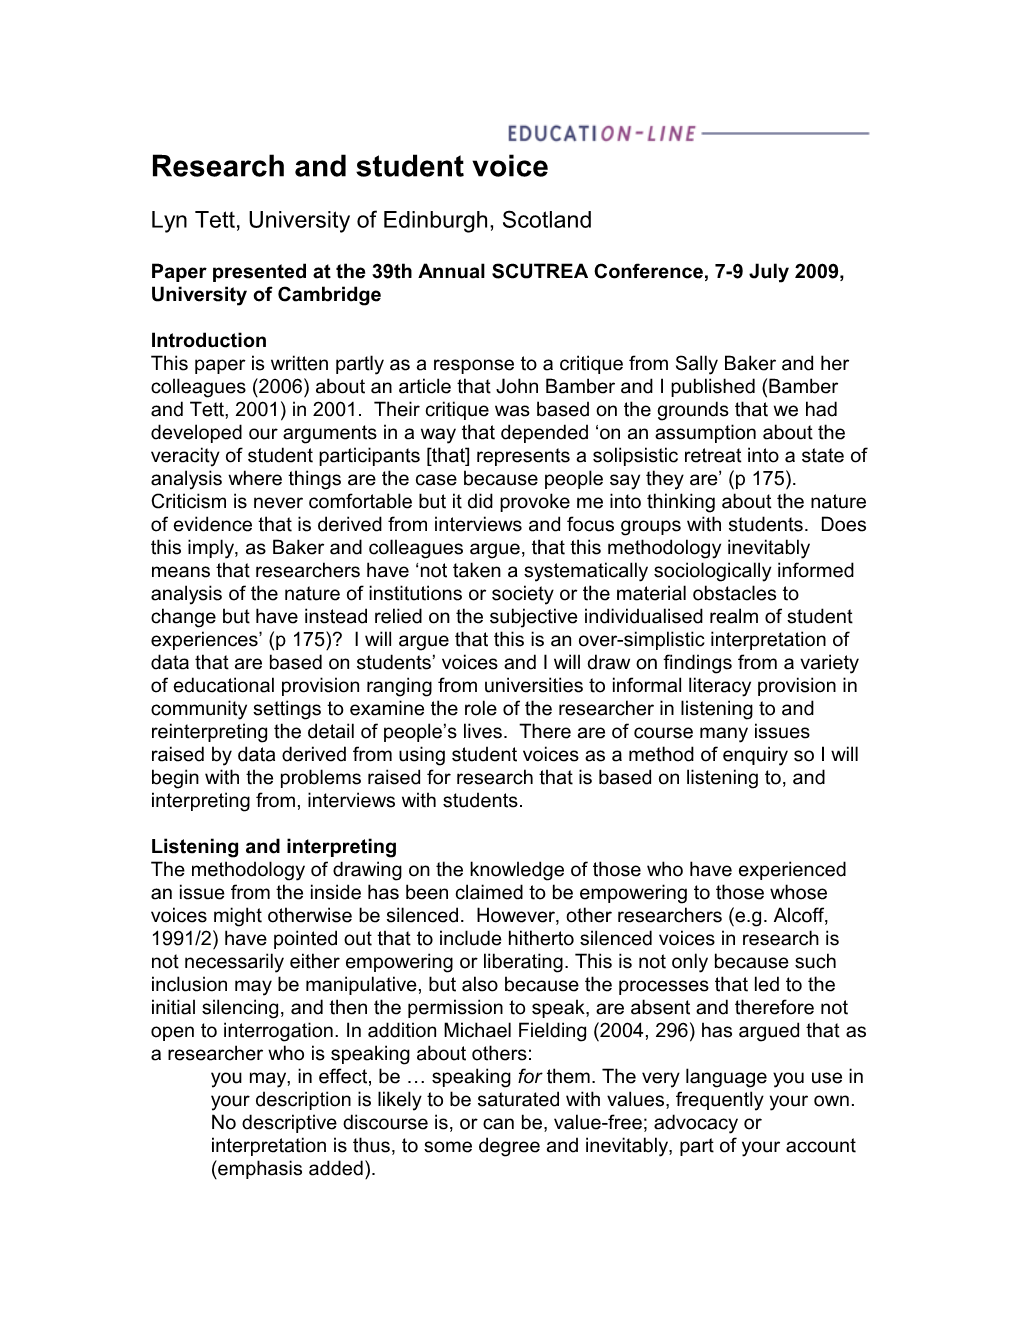 Research and Student Voice